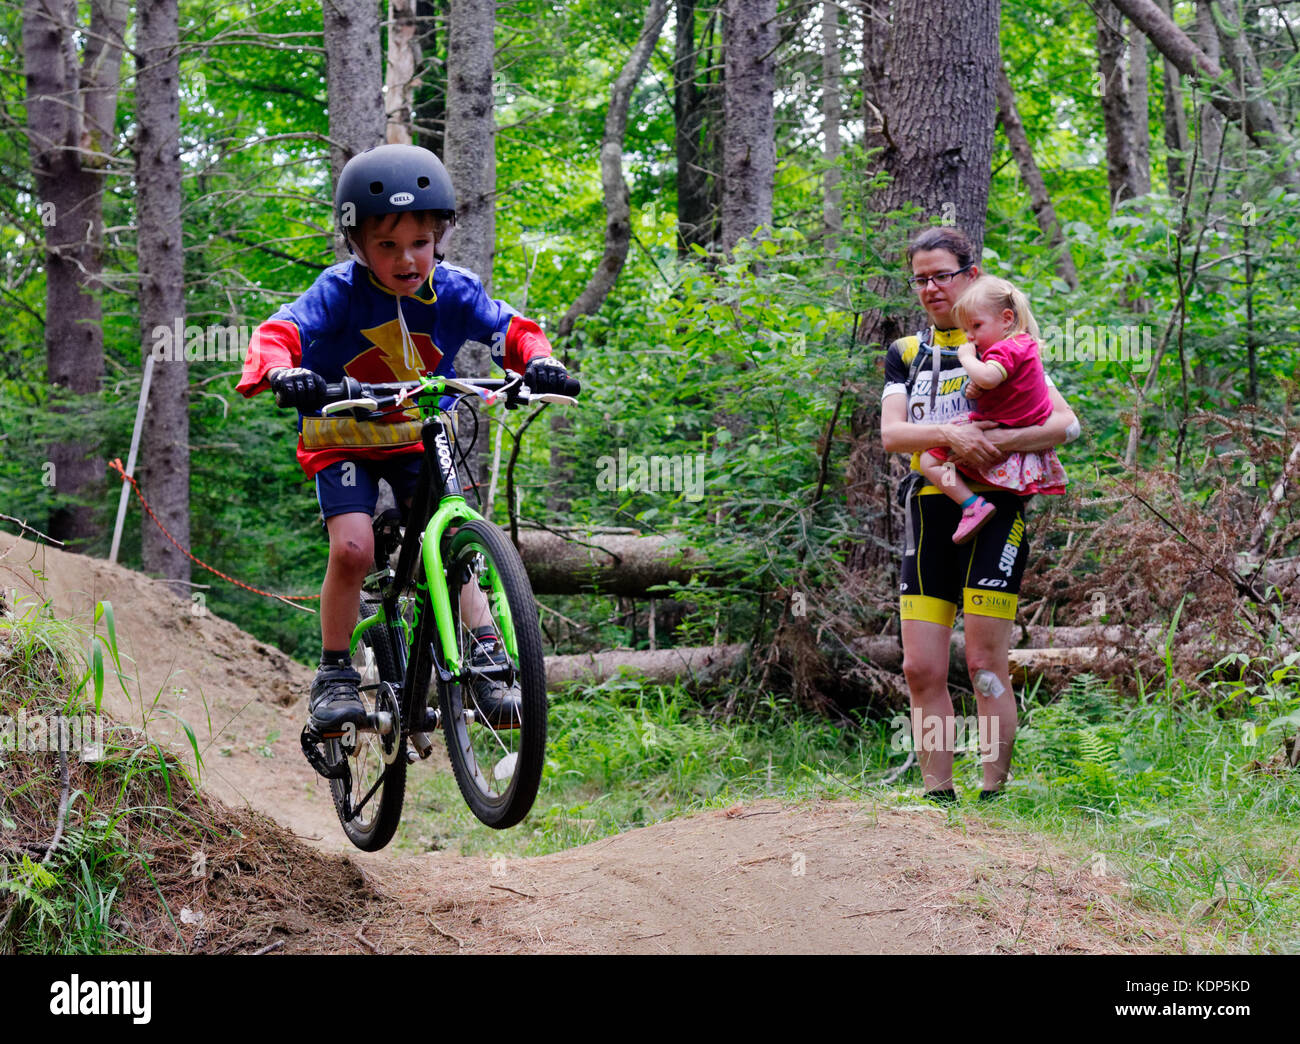 A young boy (5 yrs old) jumping in a mountain bike, while mum holding the sister, watches on Stock Photo